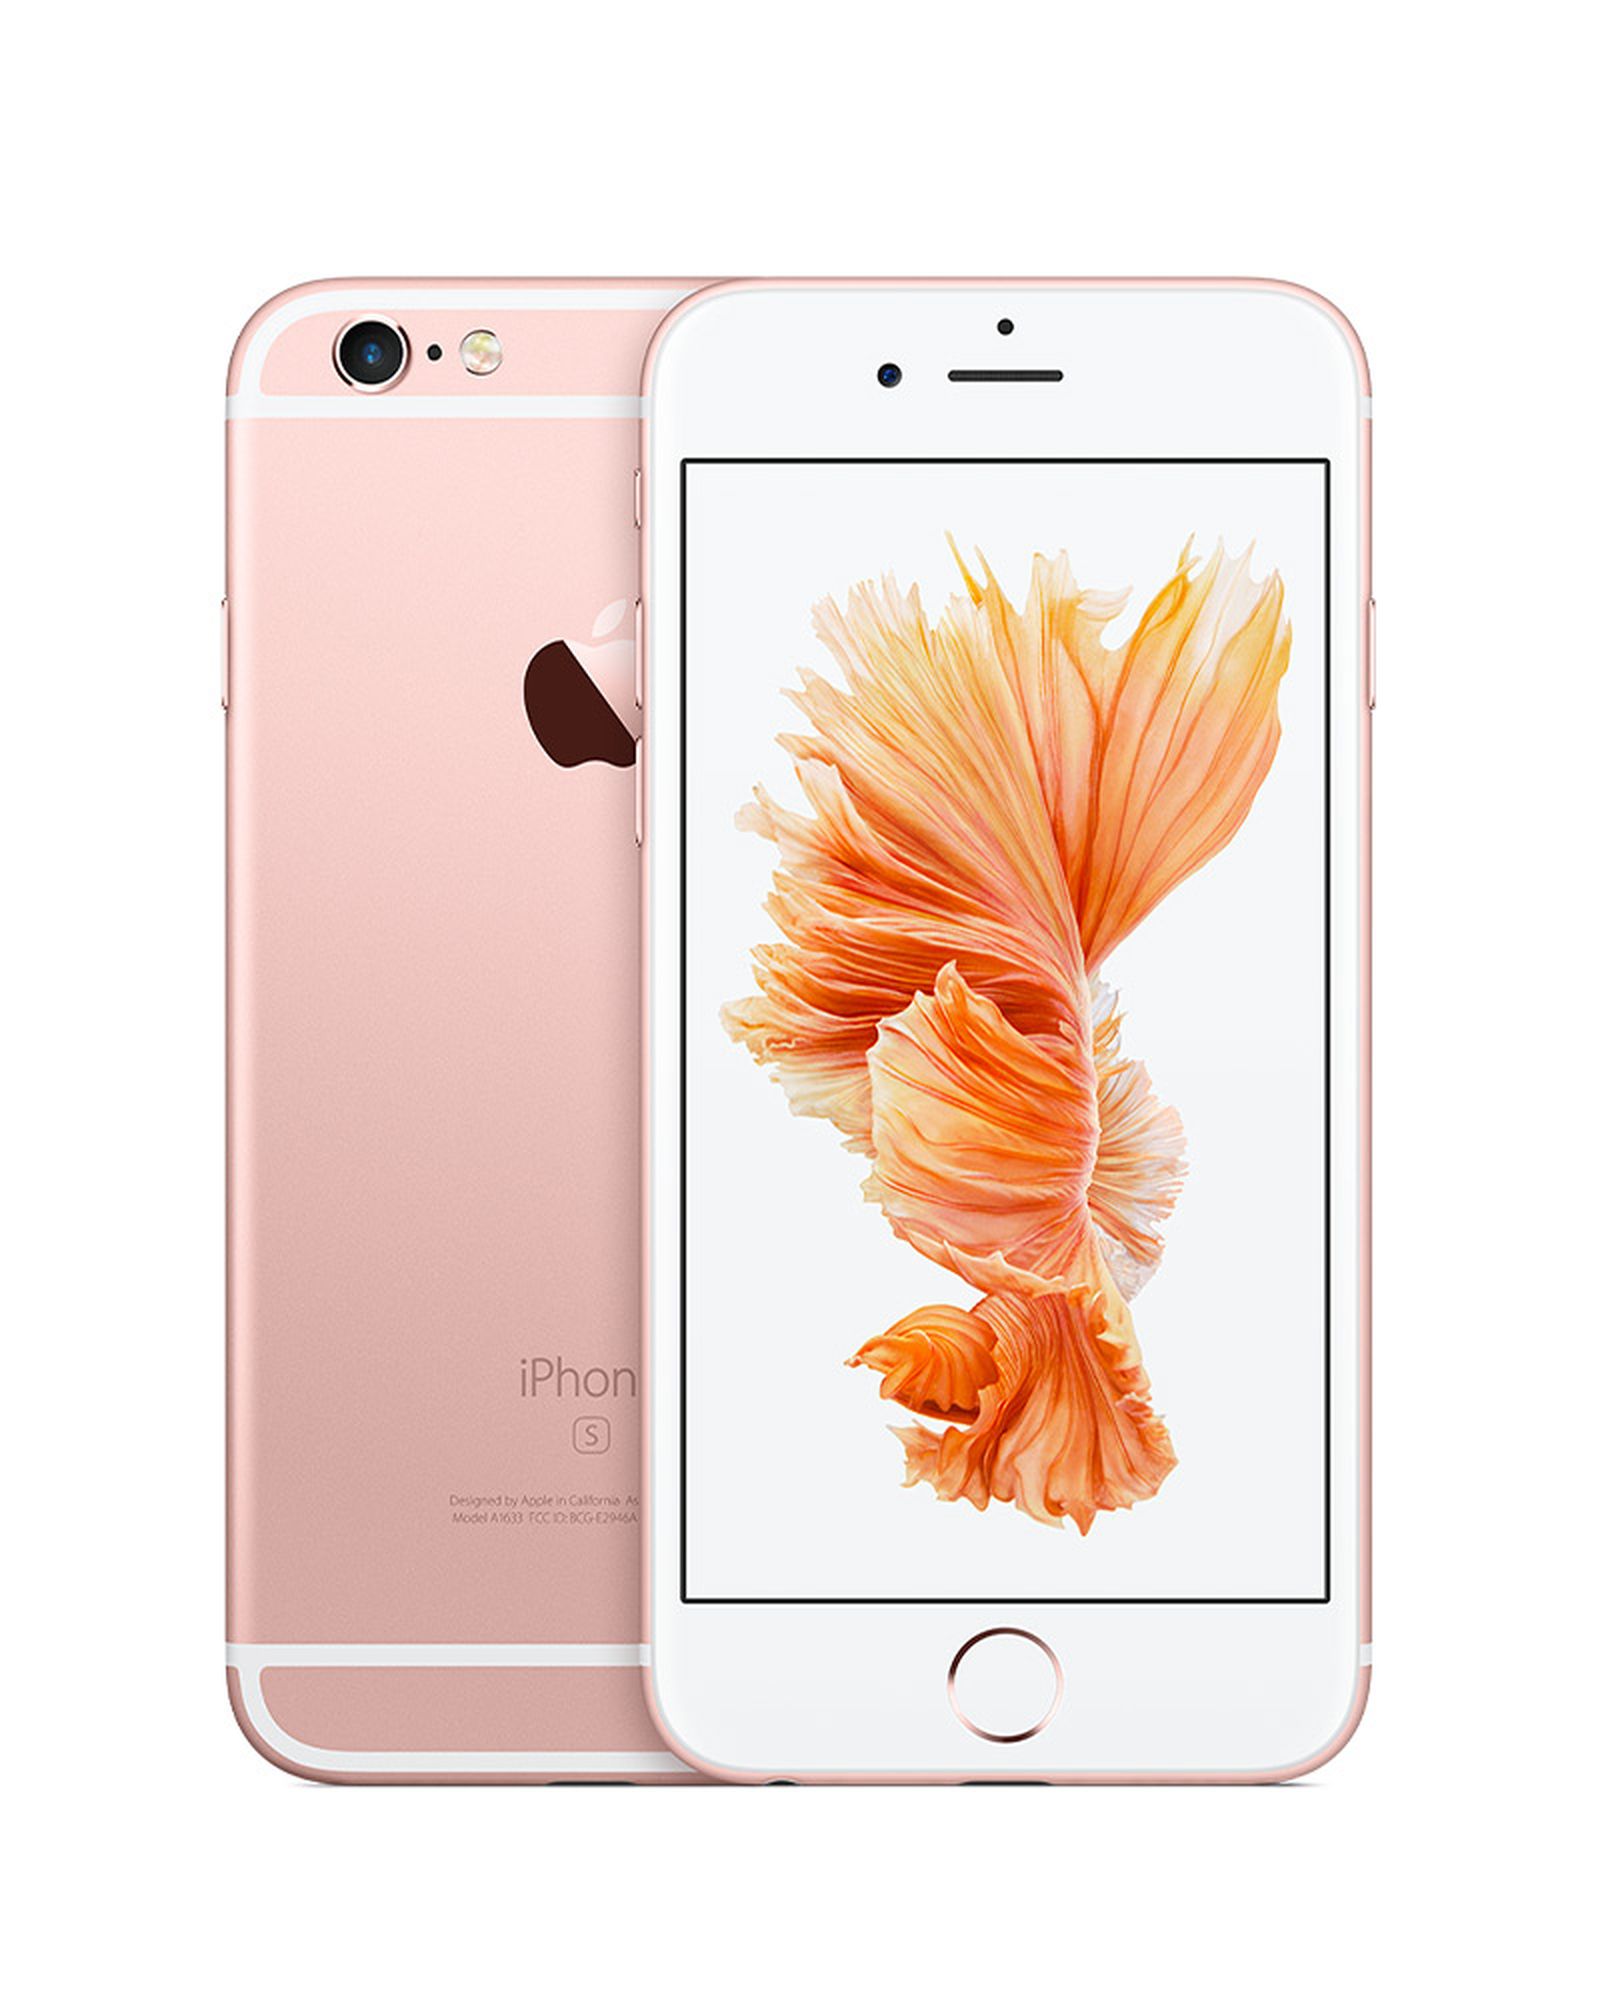 iphone6s-rosegold-select-2015